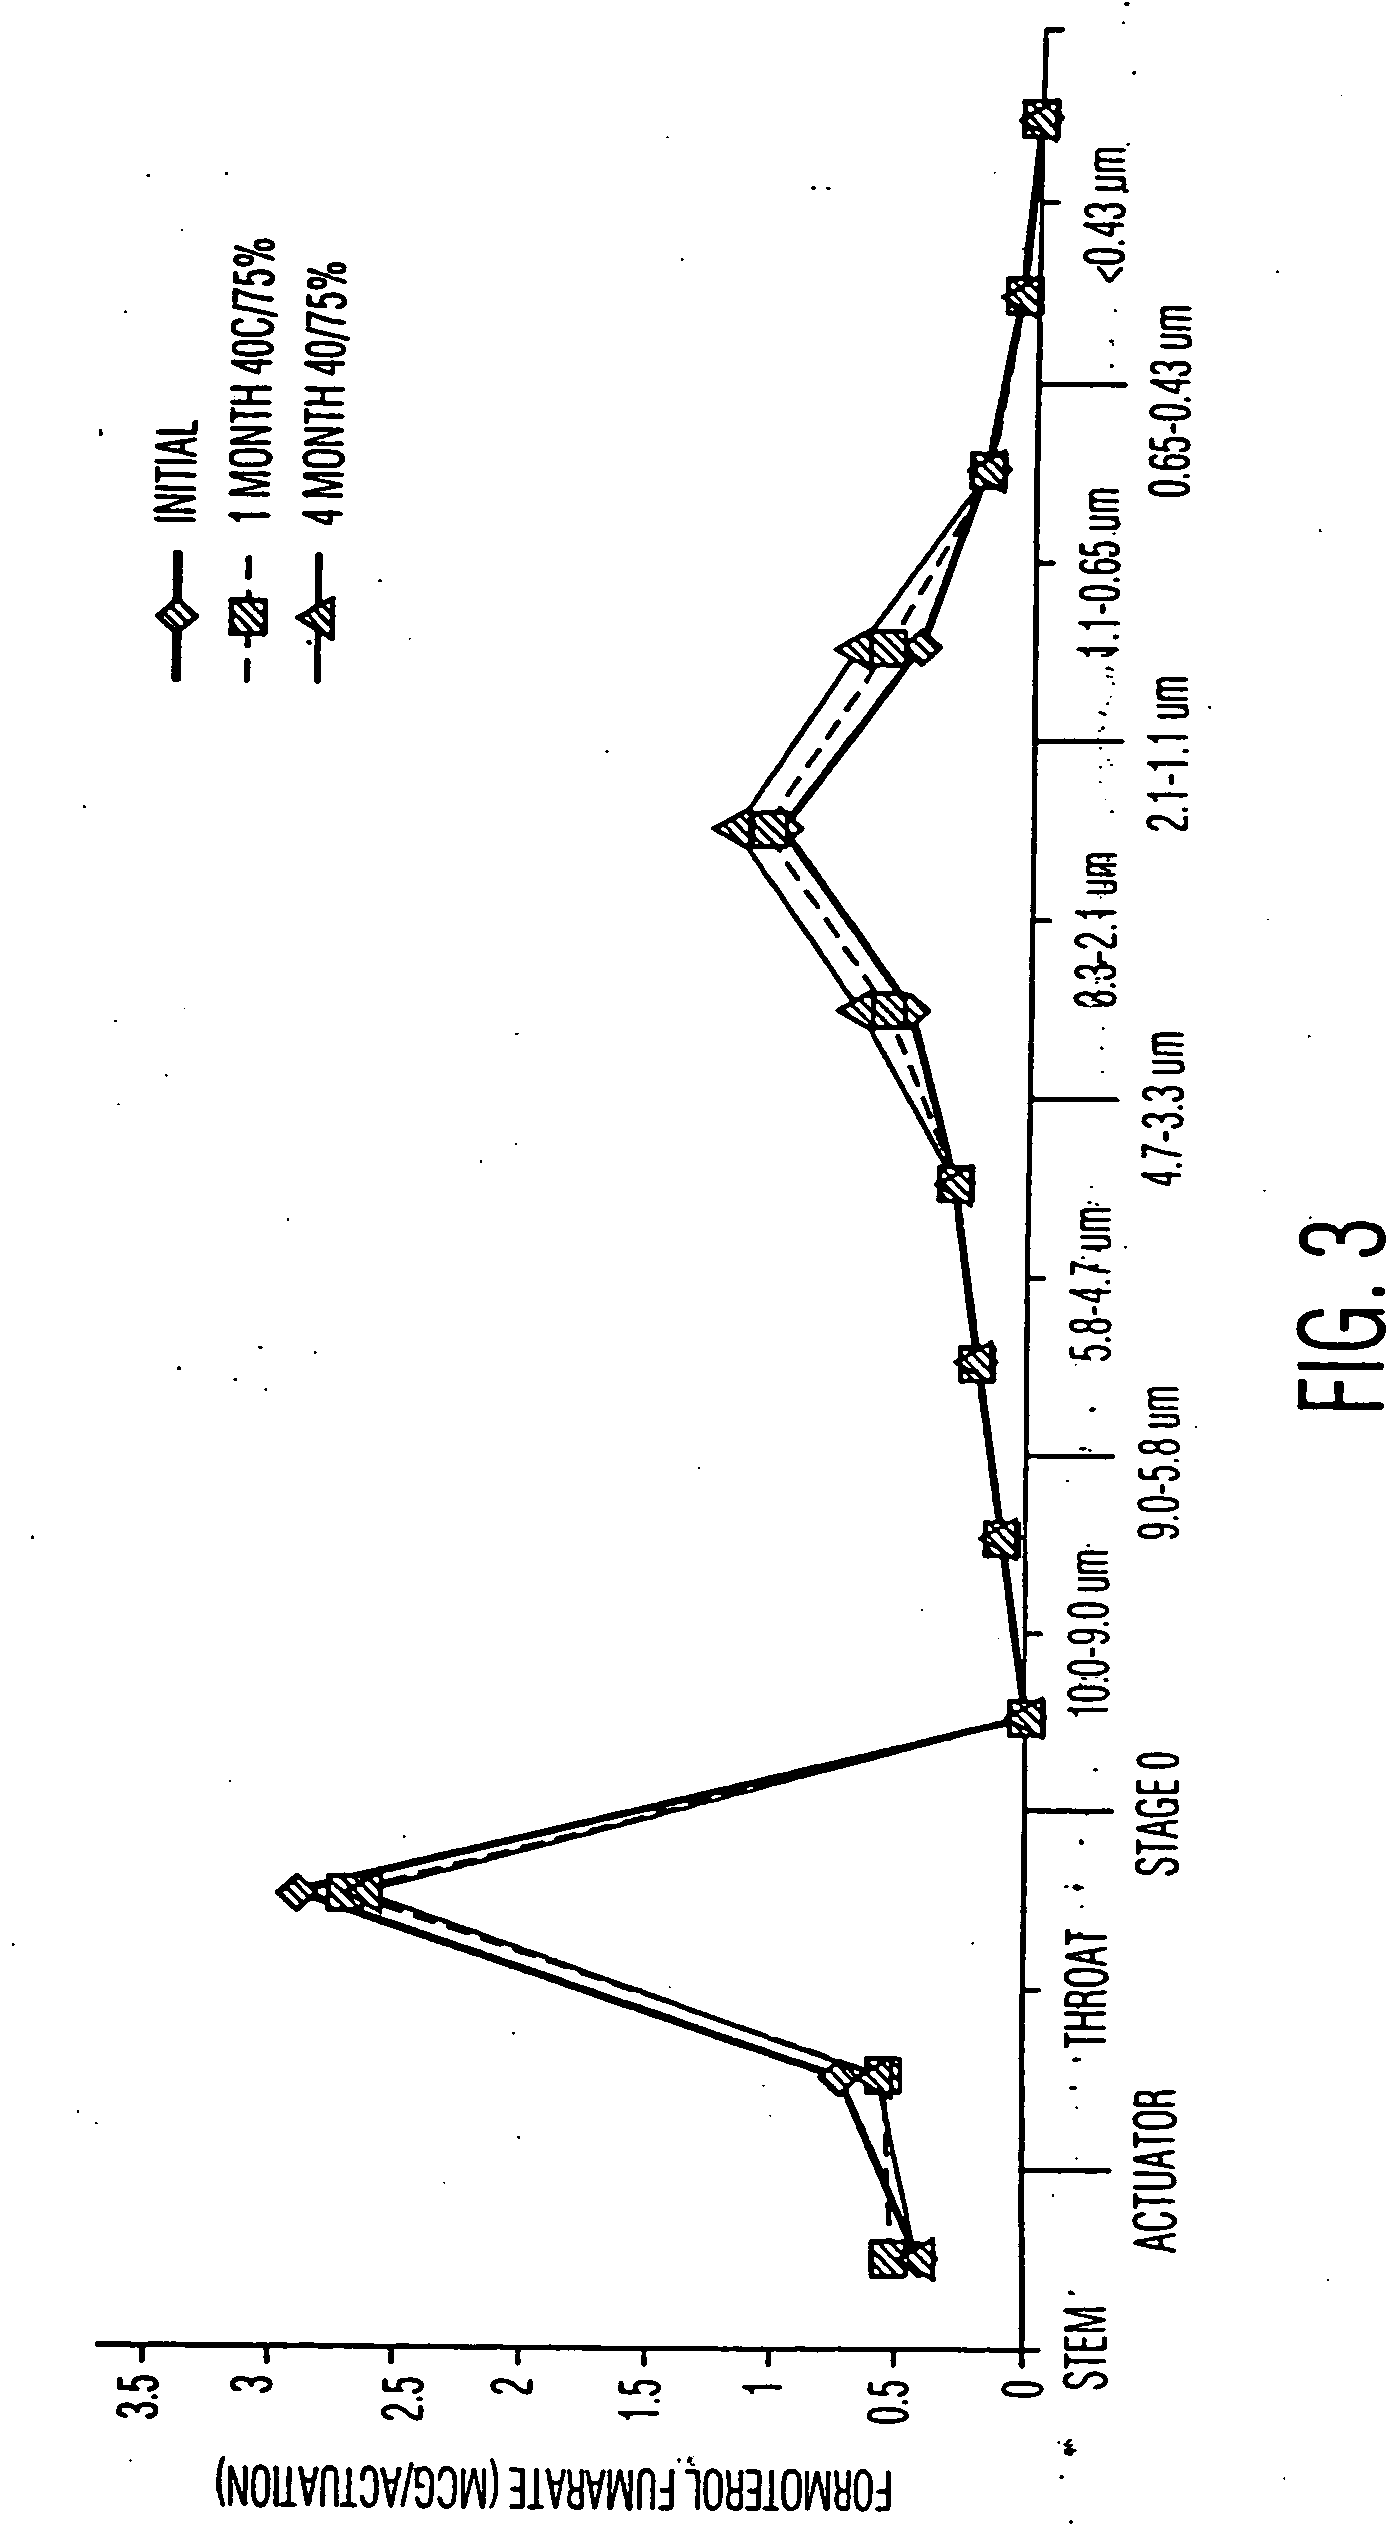 Pharmaceutical compositions for the treatment of asthma